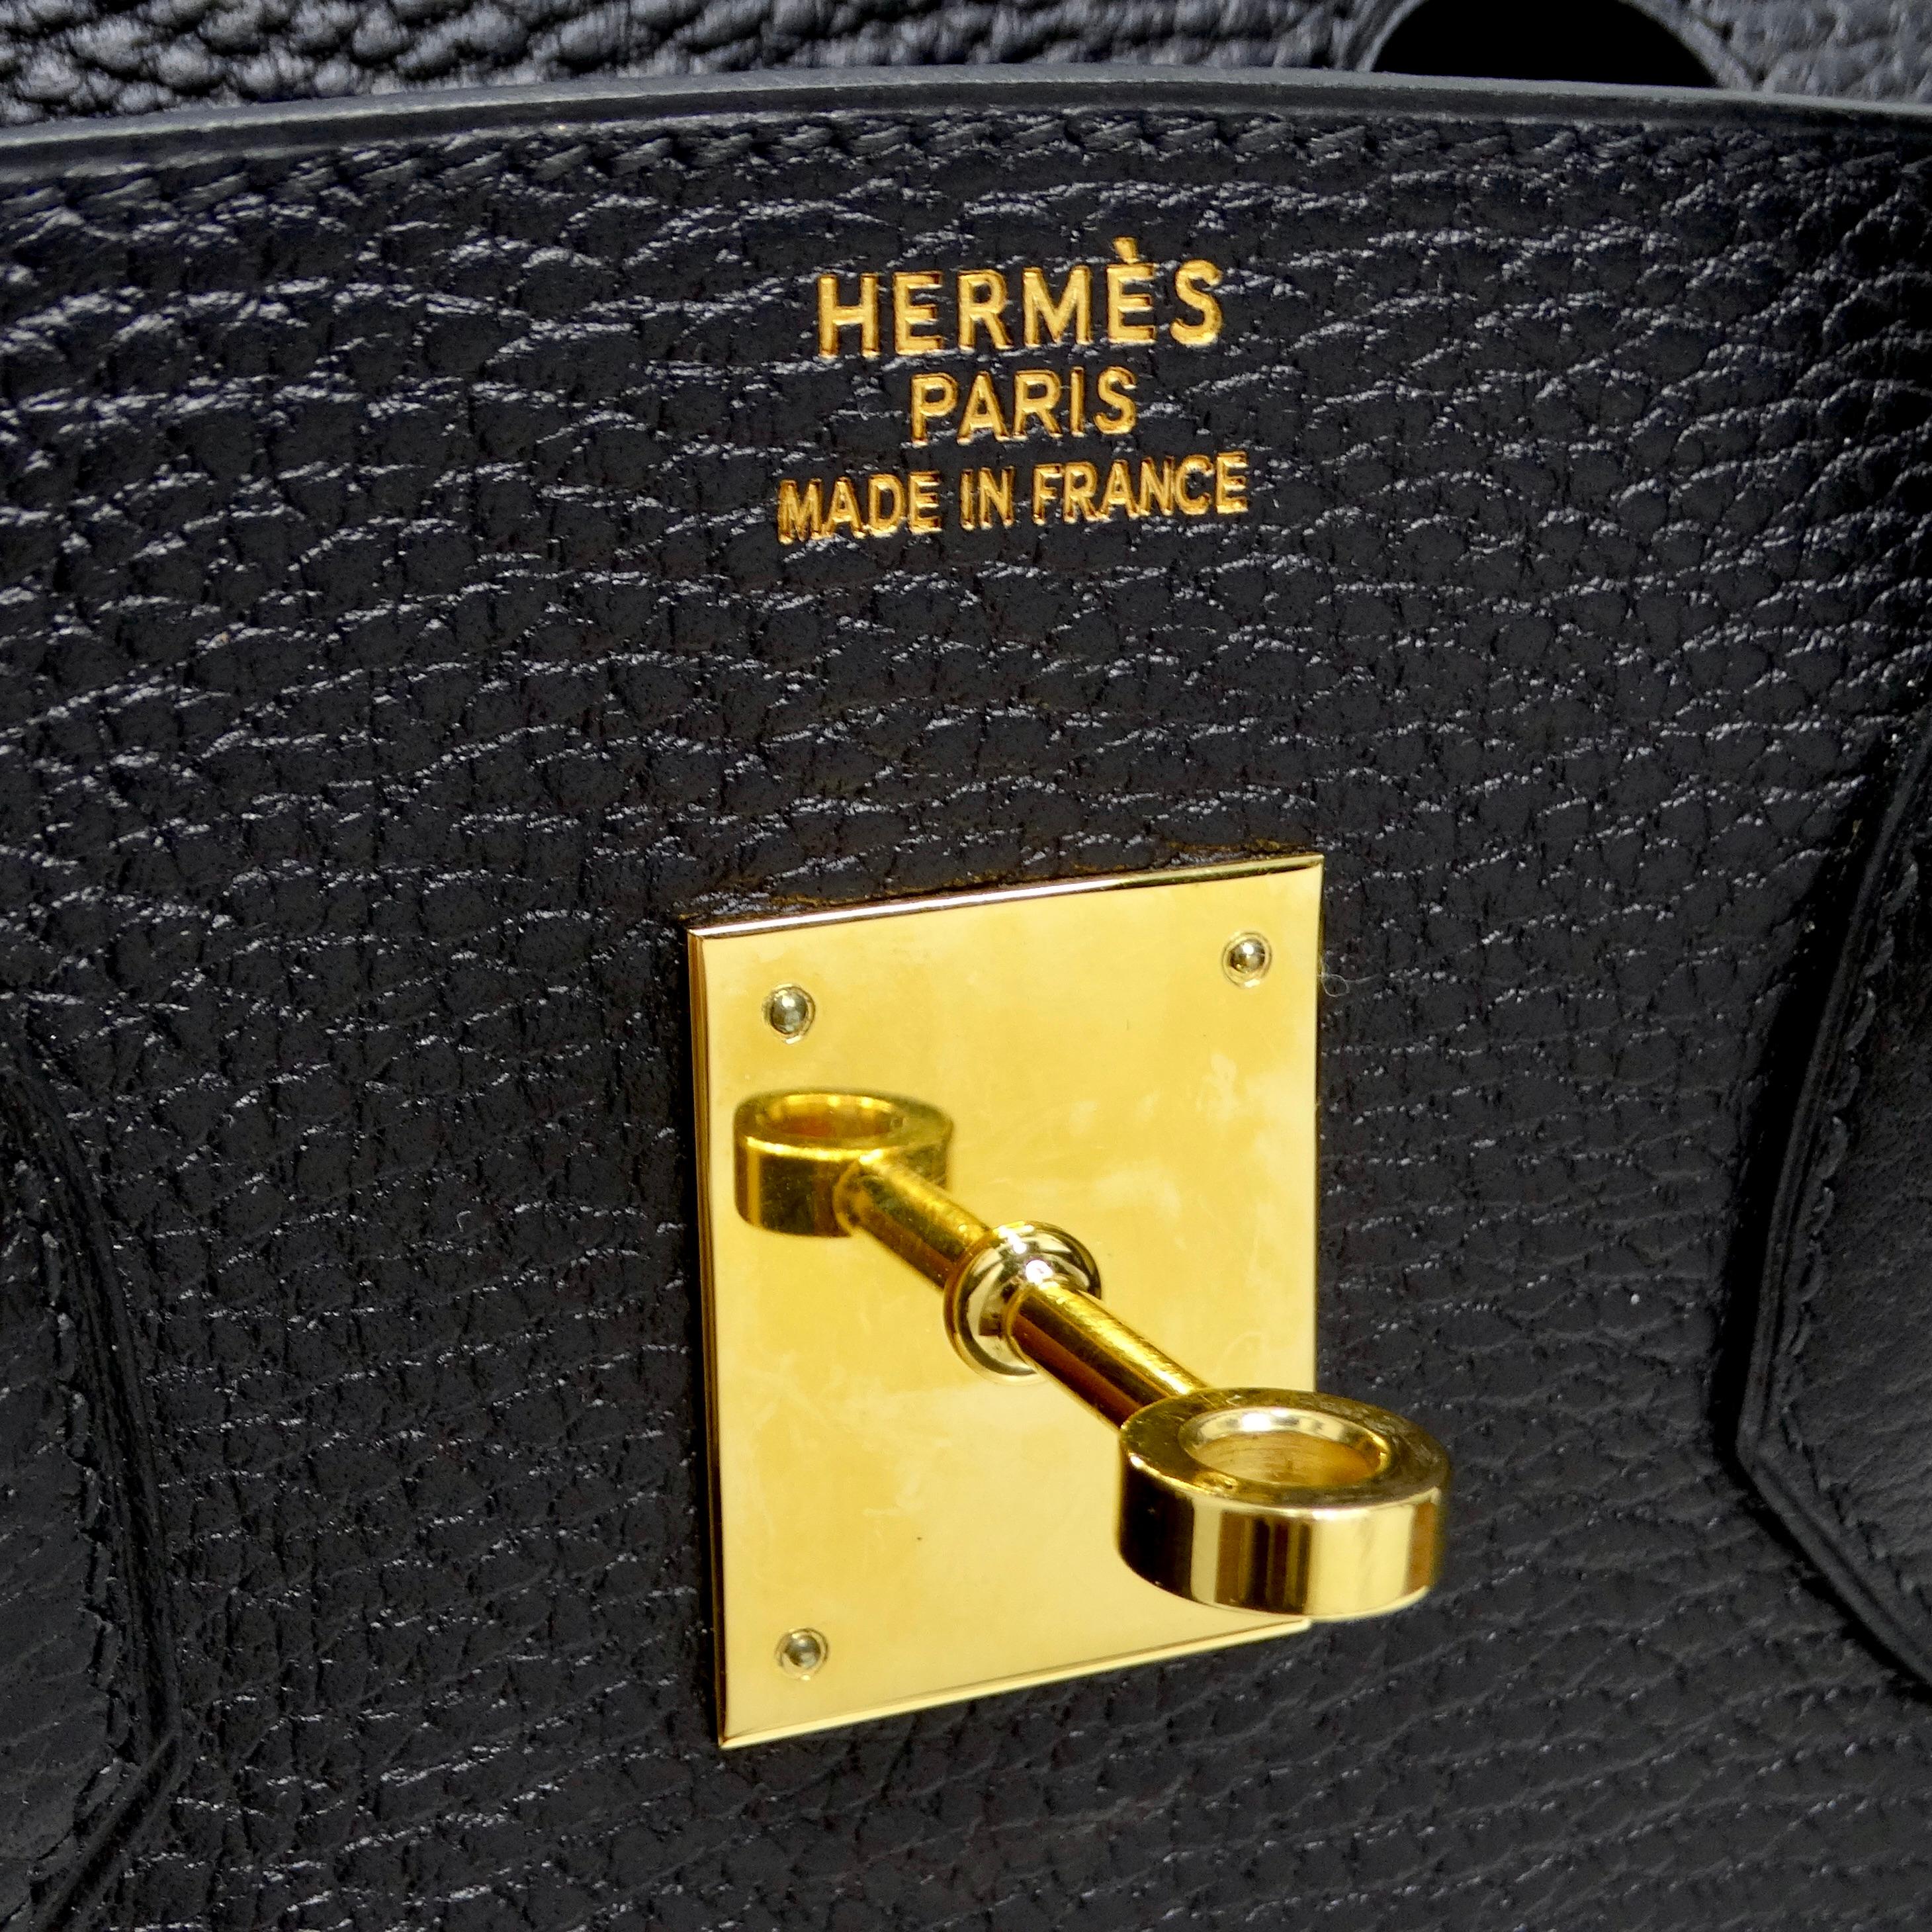 Hermes Birkin 35 in Ardennes Leather Black  In Excellent Condition For Sale In Scottsdale, AZ